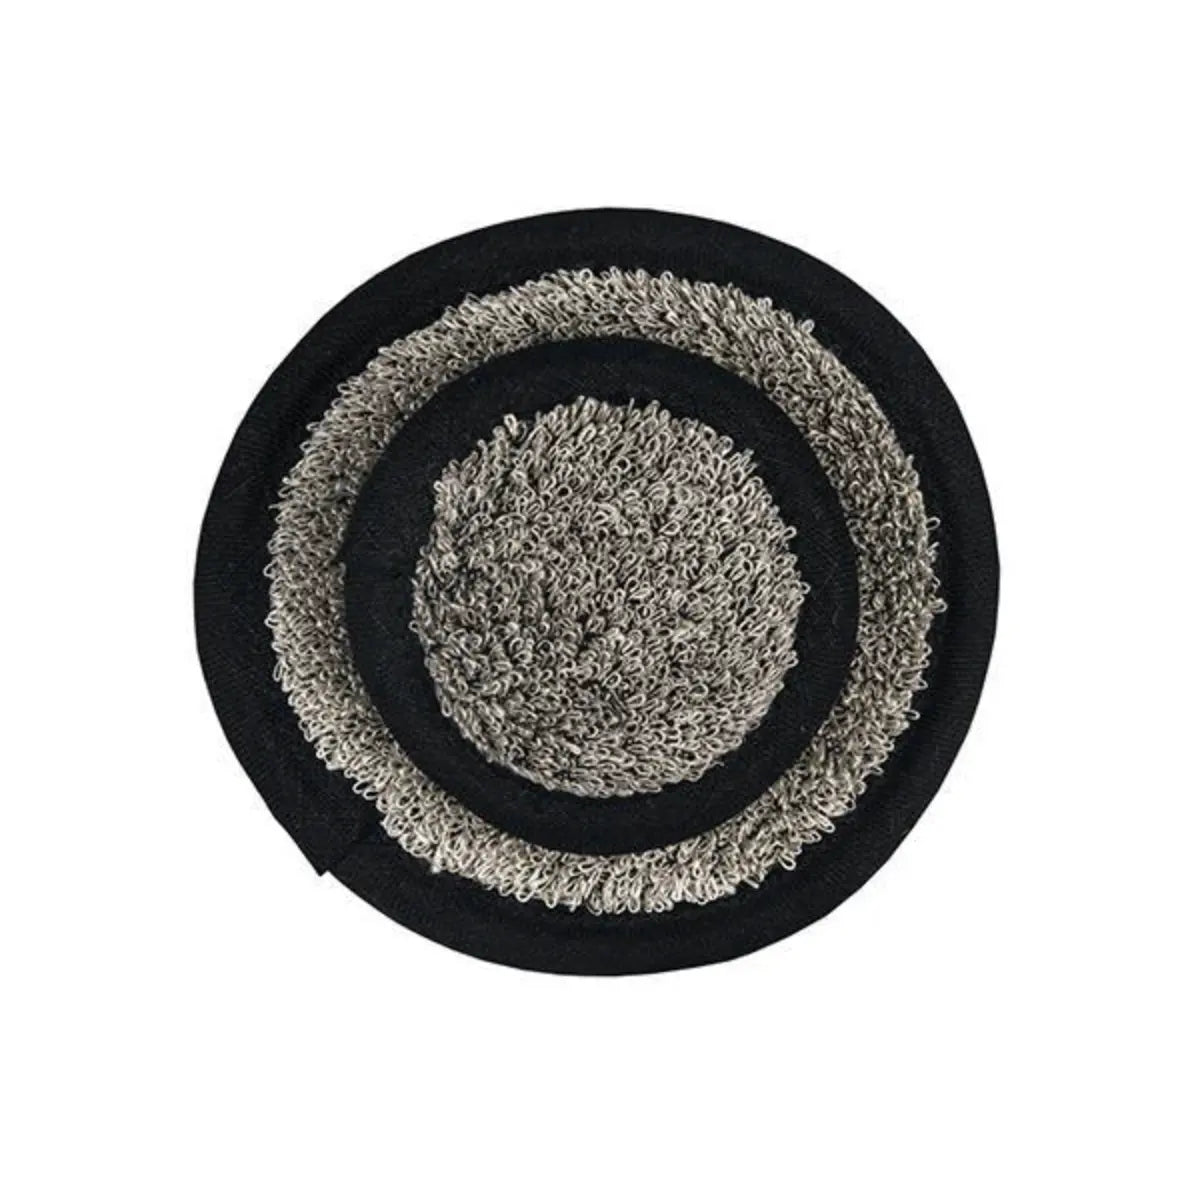 Linen Facial Pads by Axlings - Home Smith